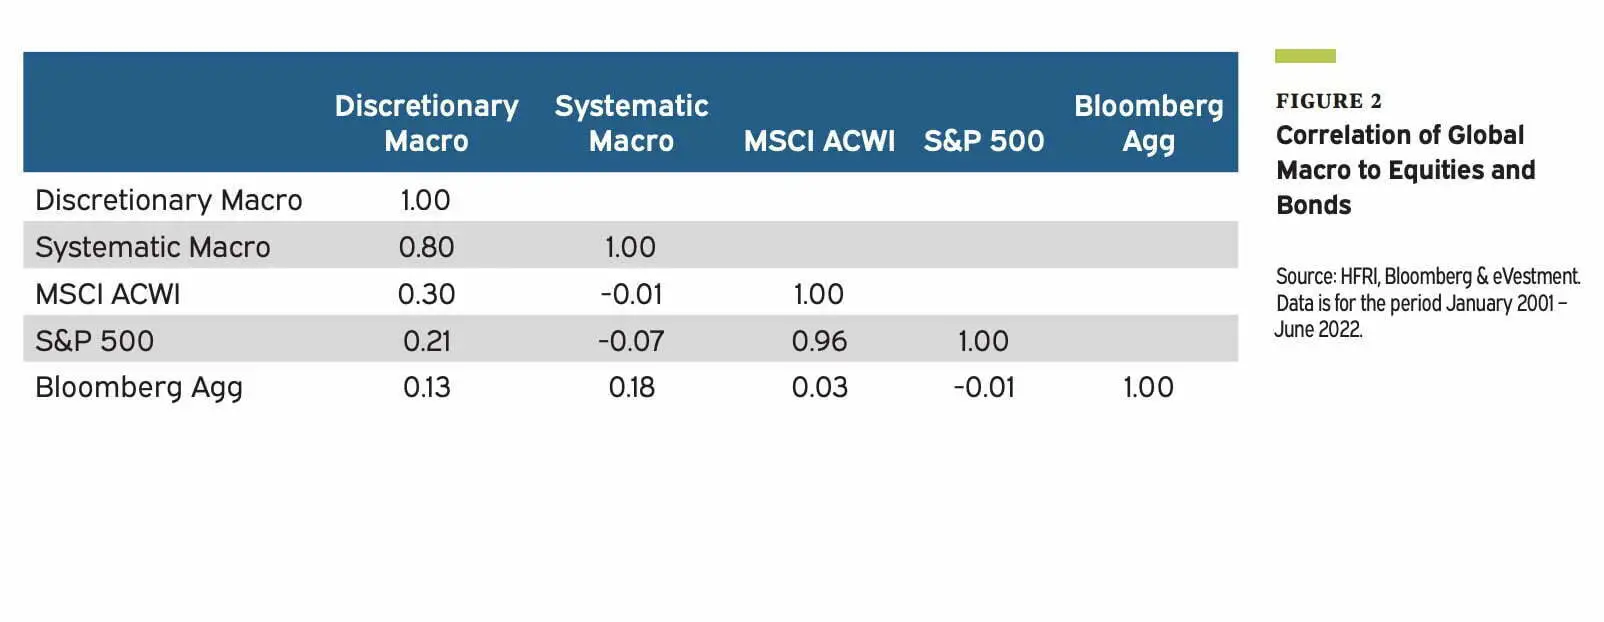 Global systematic macro investing strategy correlation with other strategies including the S&P 500 and MSCI ACWI 